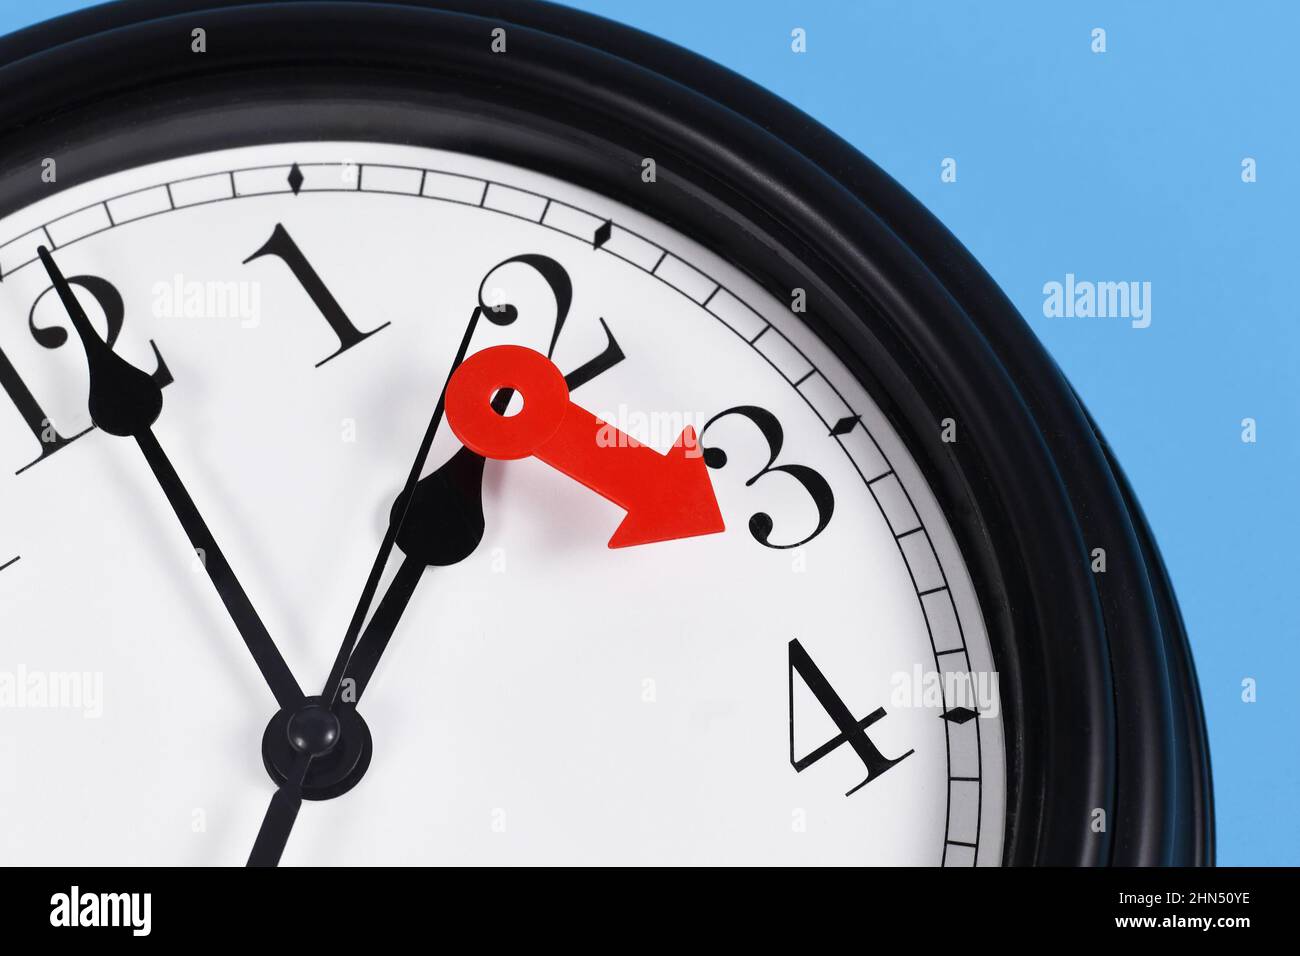 Summer time change for daylight saving in Europe concept. Red arrow symbolizing clock turned forward by one hour Stock Photo